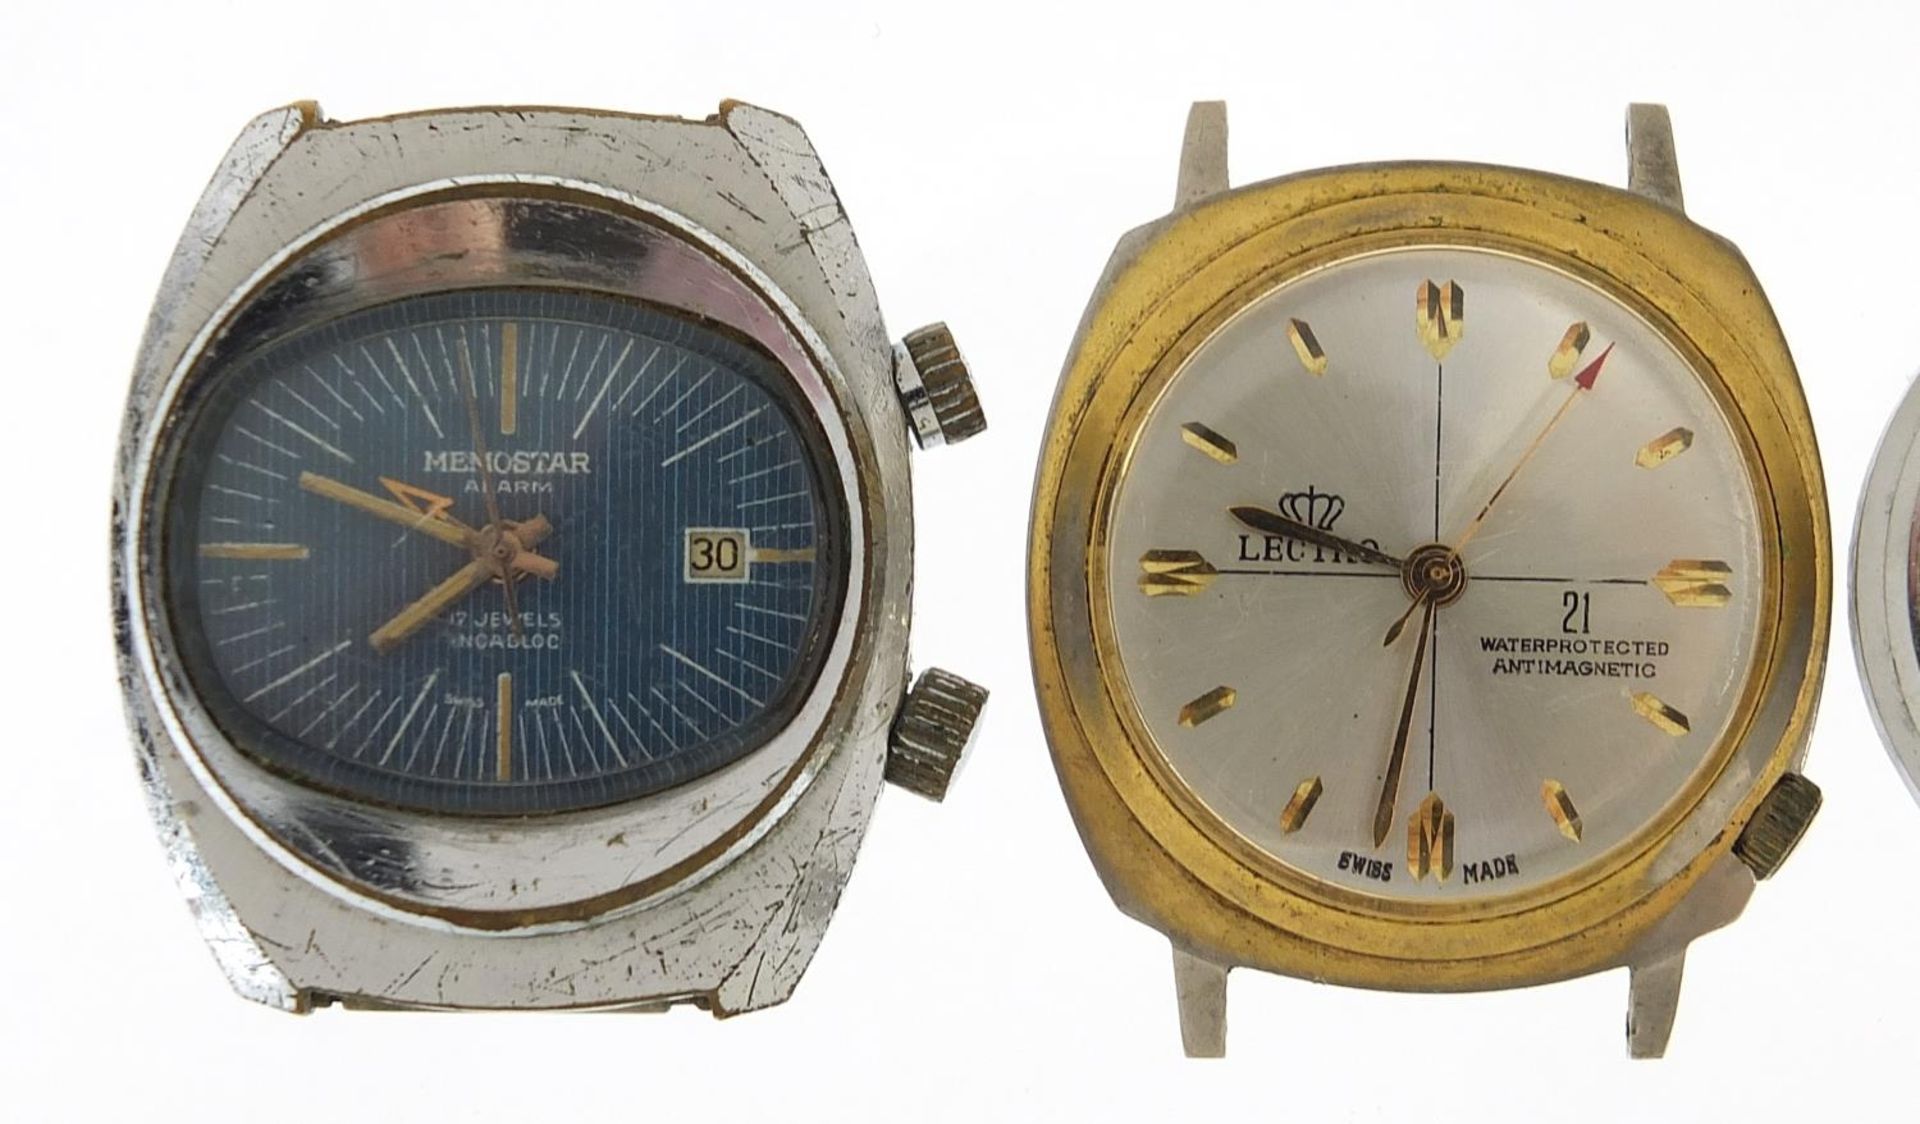 Five vintage wristwatches including Ingersoll Triumph, Memostar alarm, Lectro and Ingersoll - Image 2 of 5